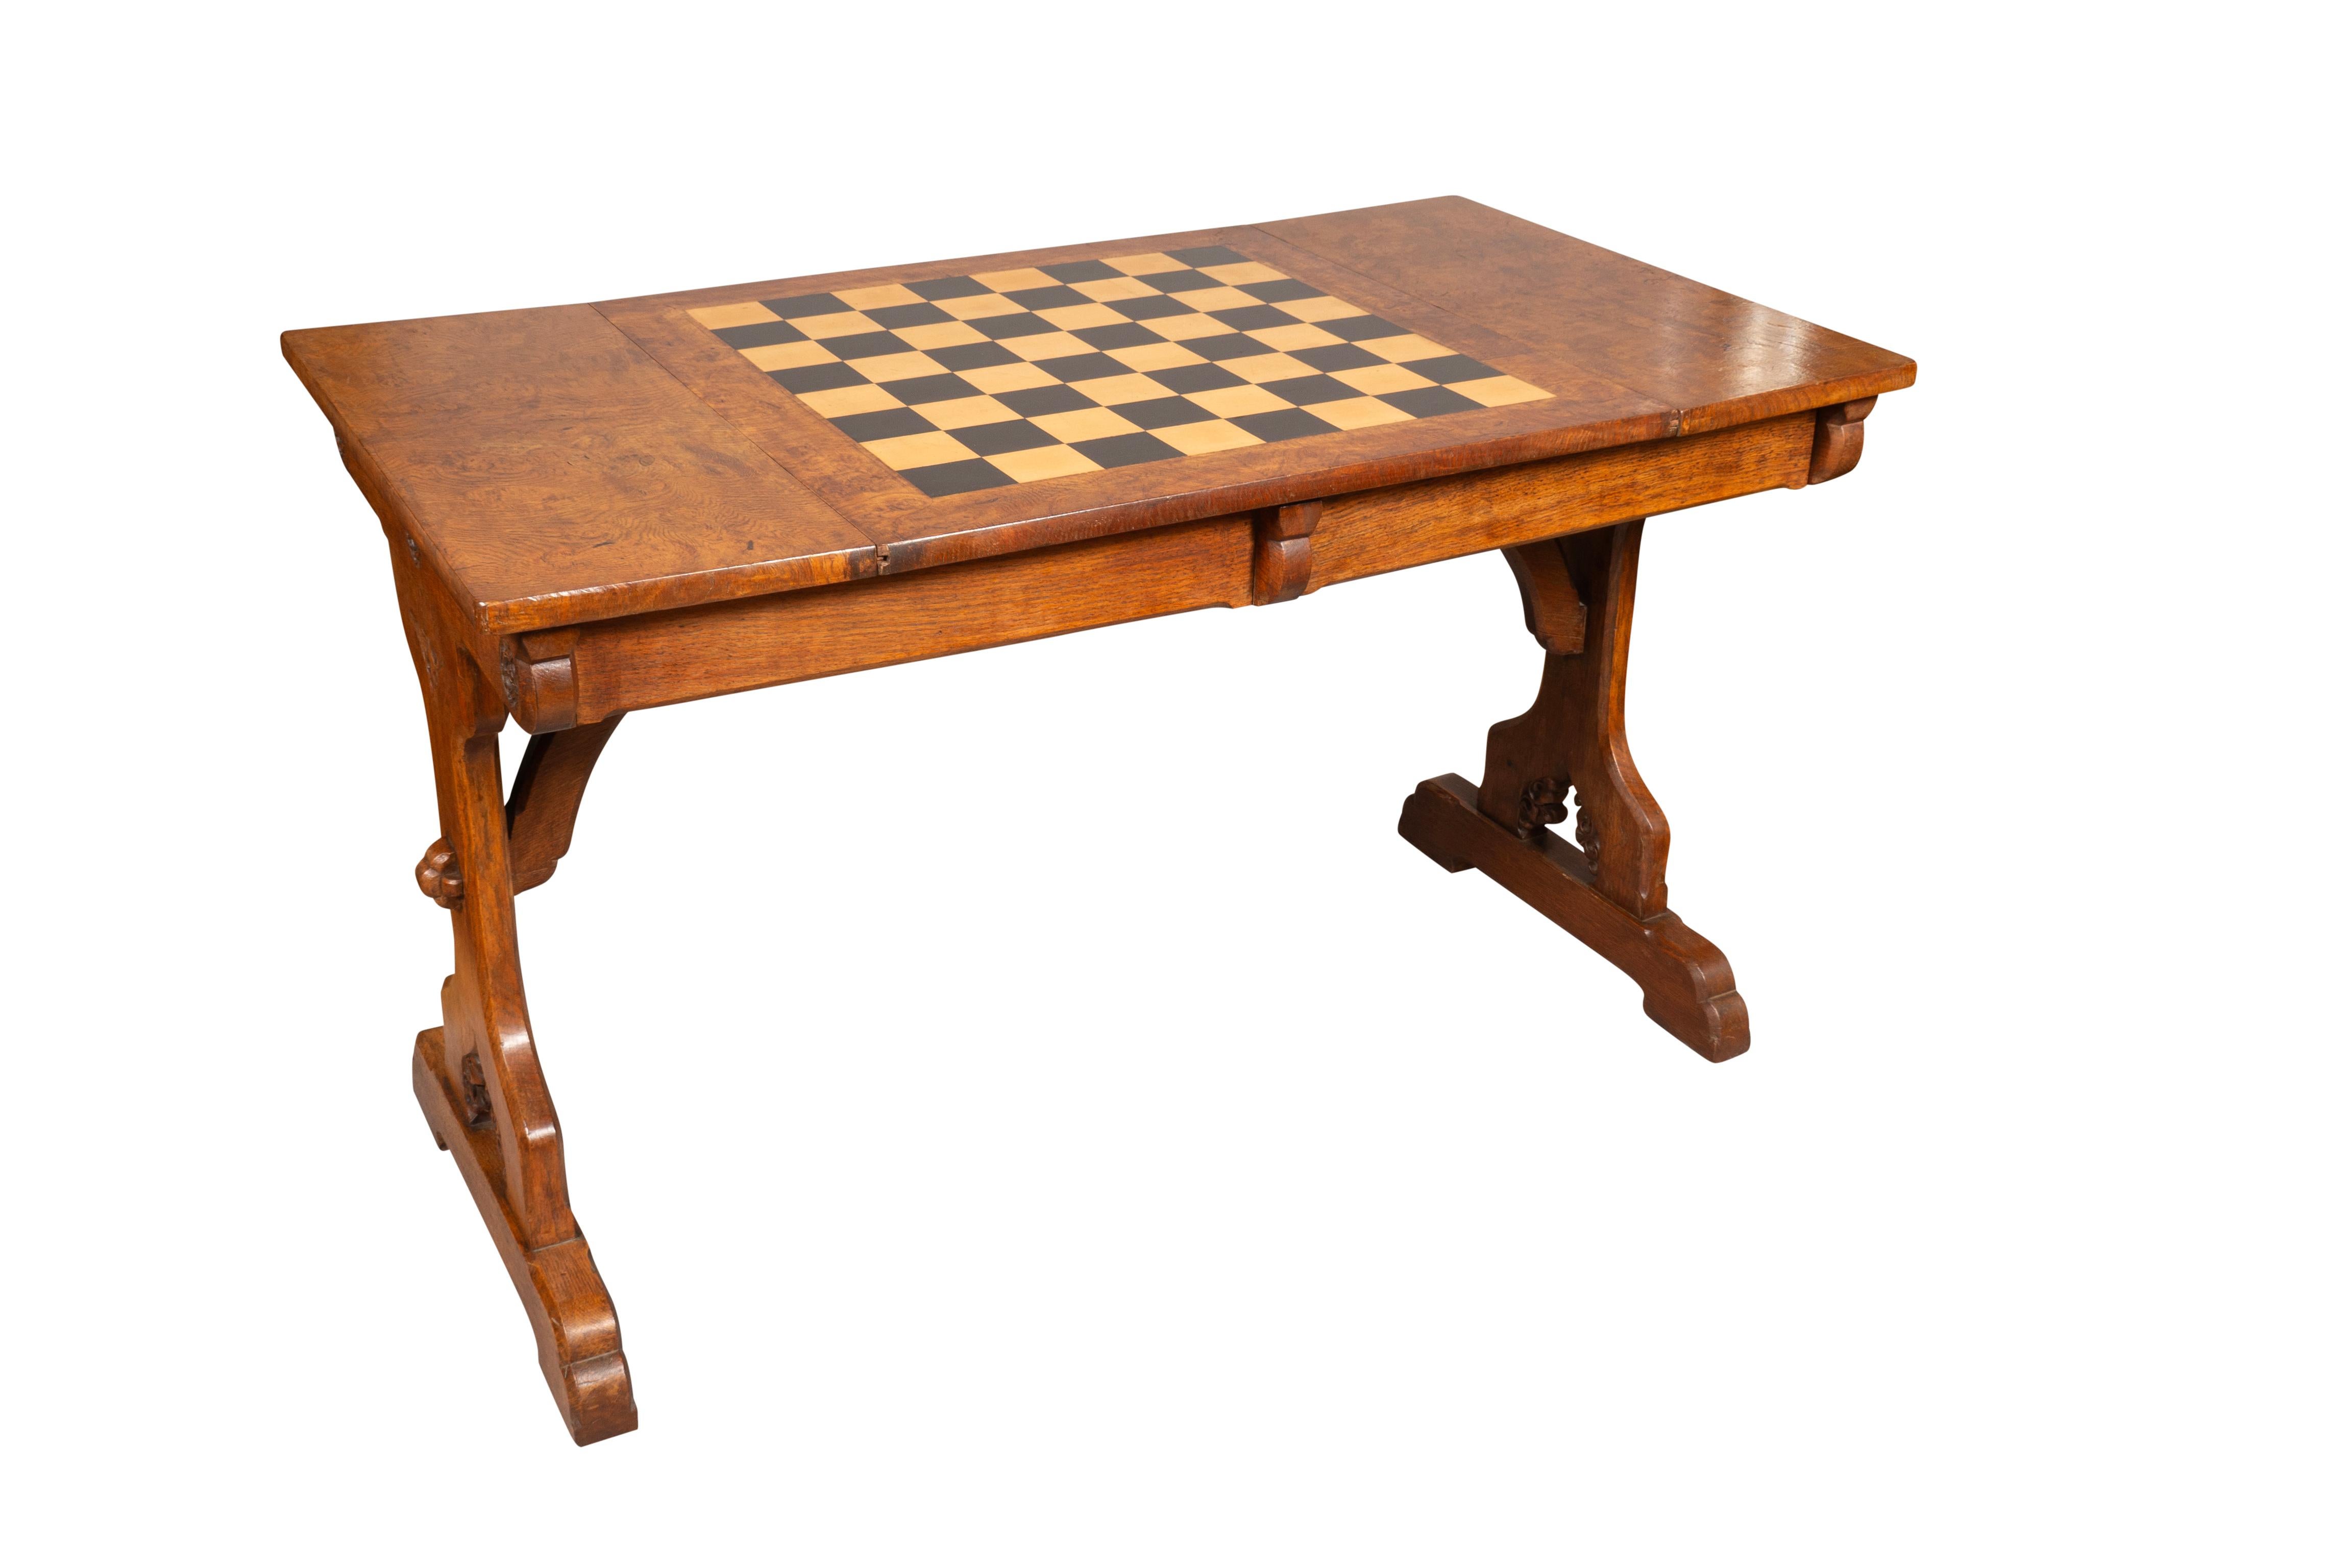 Rectangular with pollard oak veneer top with central reversible game board. The frieze containing two drawers. The ends of the table with carved Tudor rose decoration. Trestle base with carved inscription of two families initials possibly a wedding